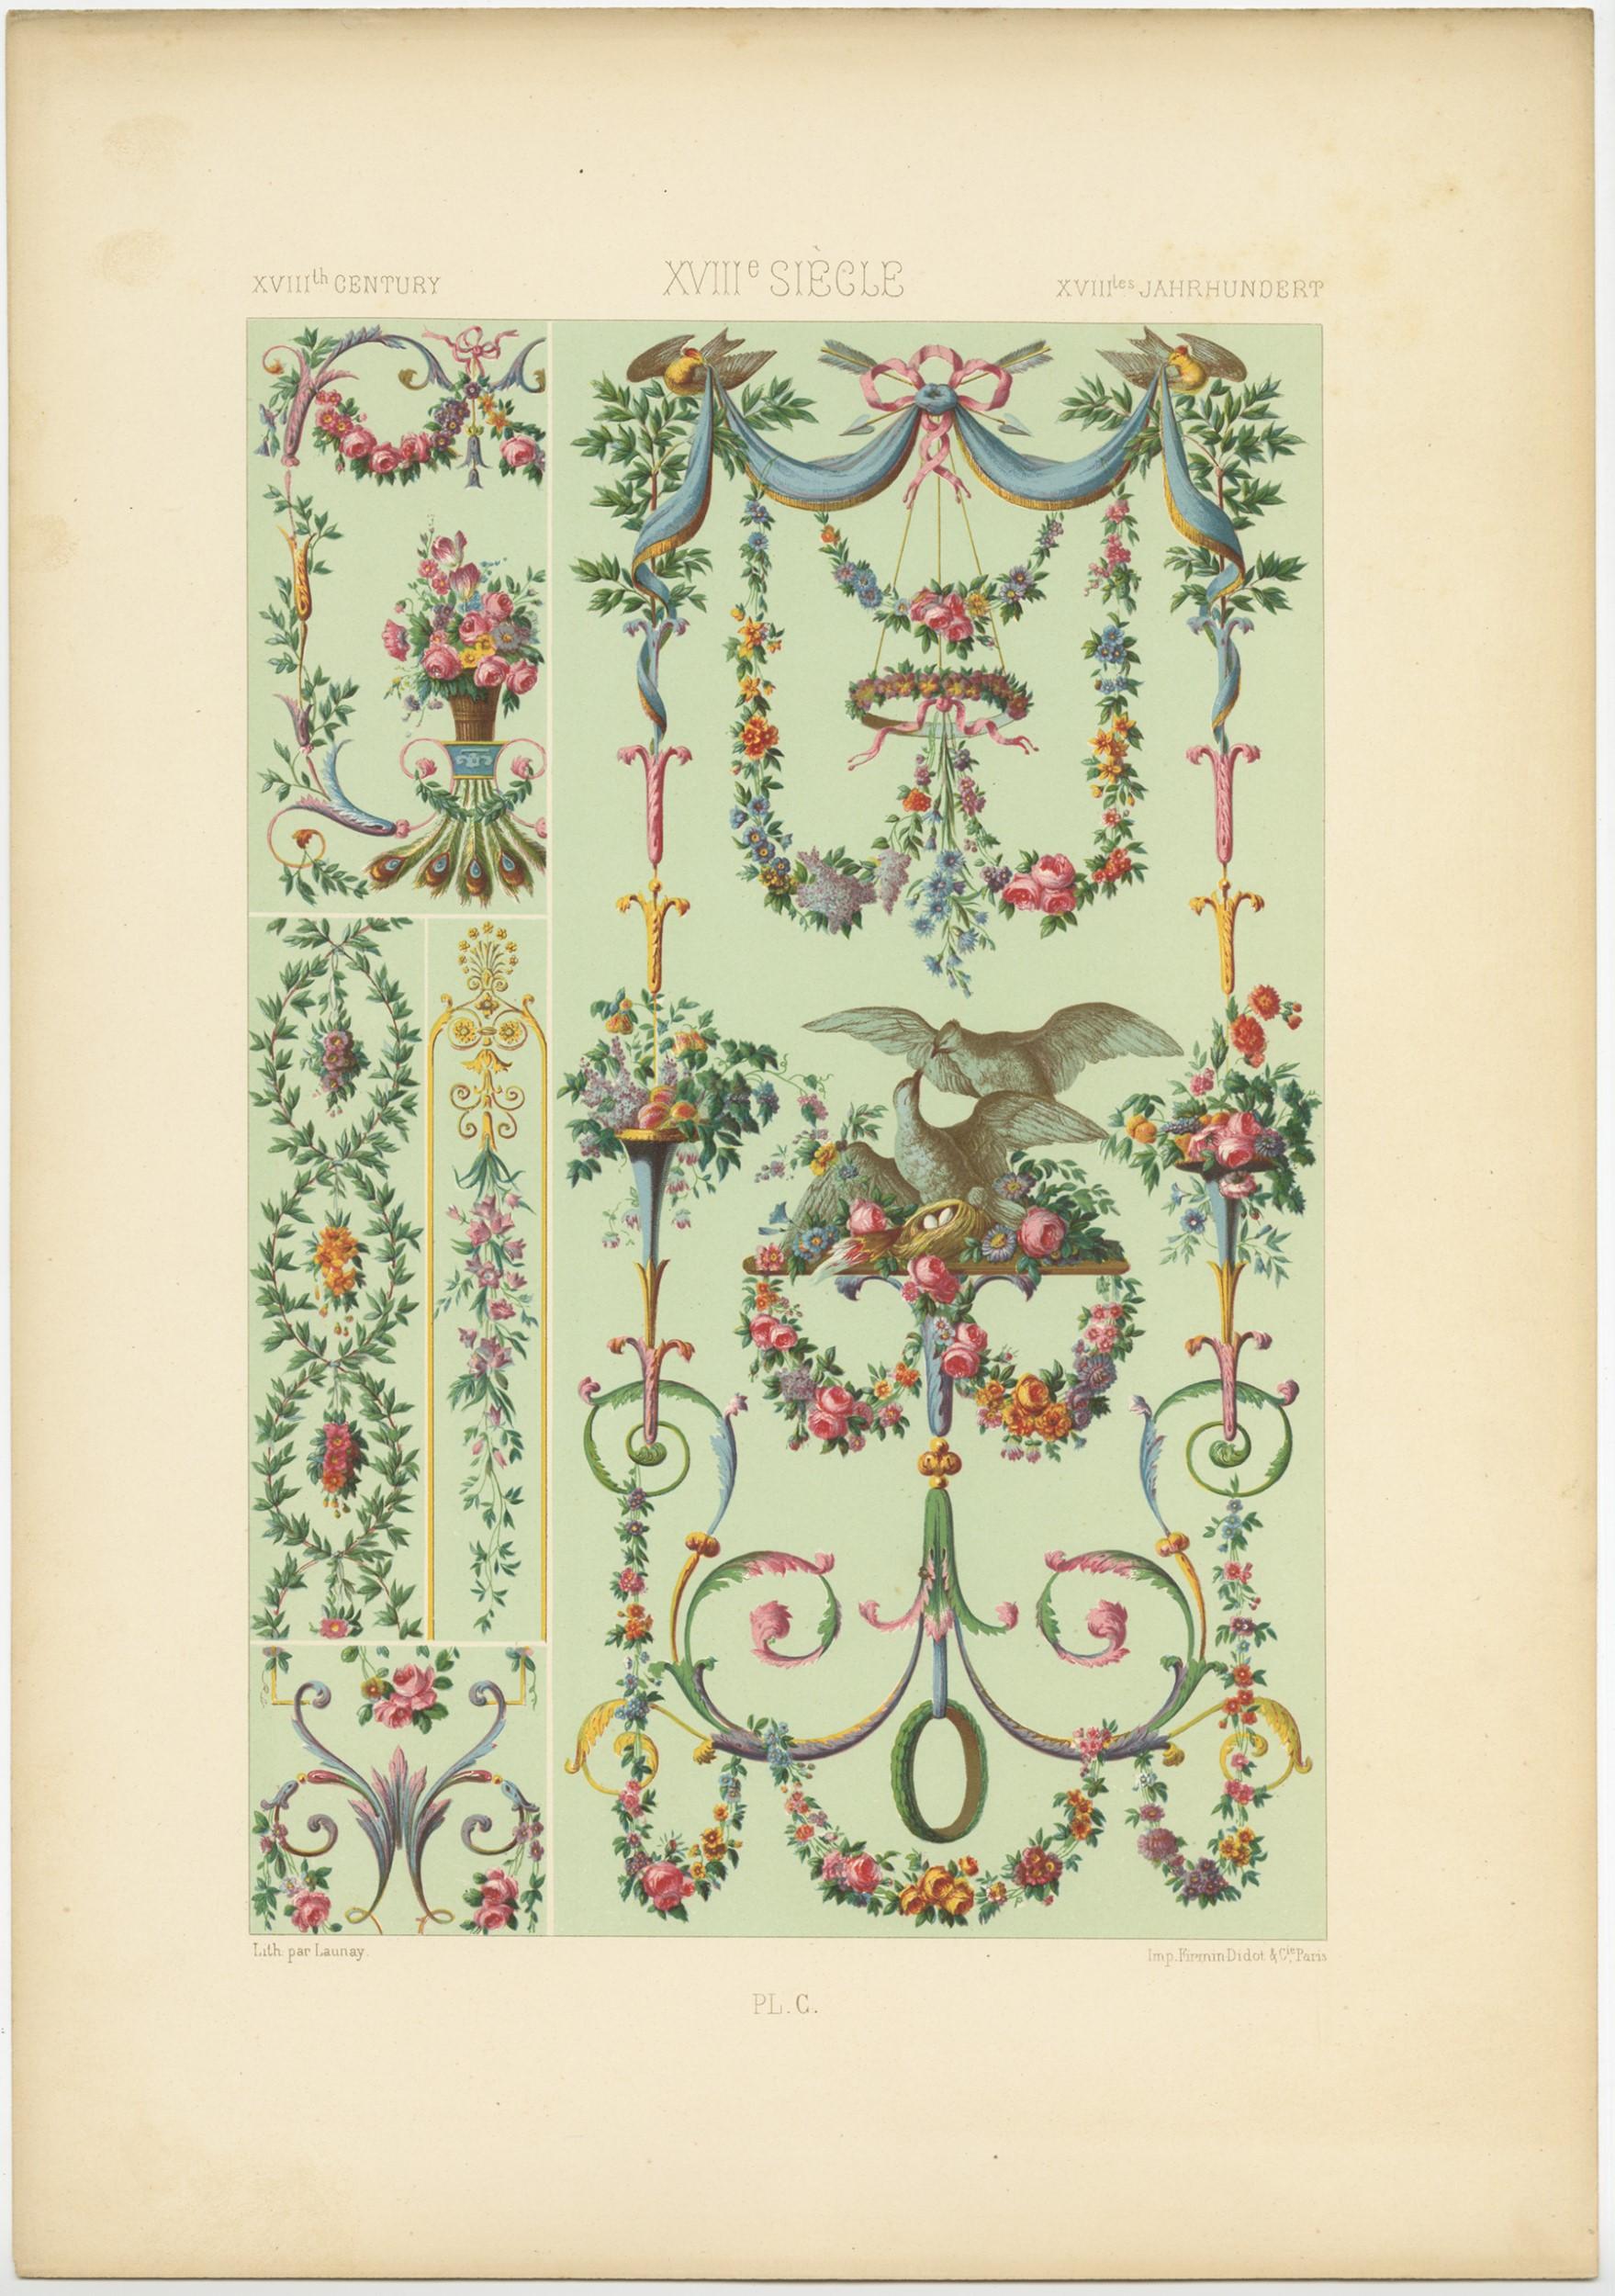 19th Century Pl. 100 Antique Print of XVIIIth Century Ornaments by Racinet (c.1890) For Sale